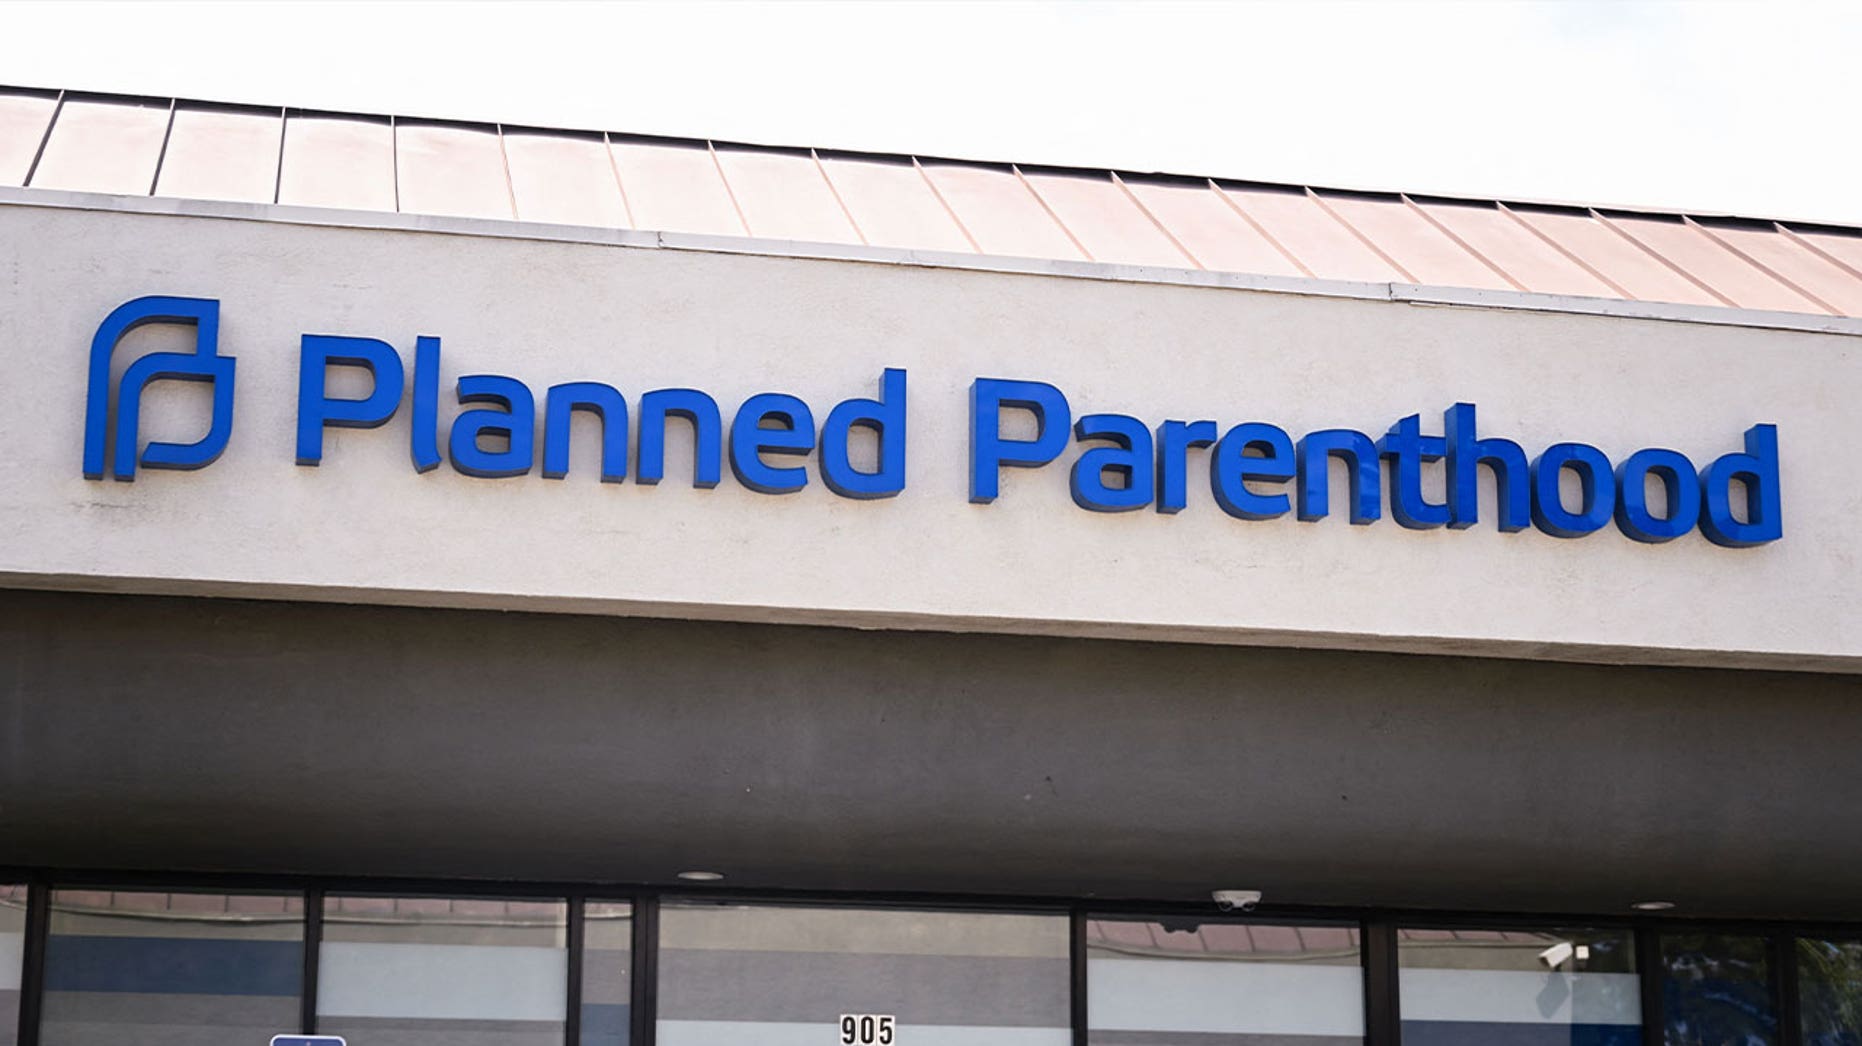 Planned Parenthood suffers loss in legal challenge to South Carolina's fetal heartbeat law